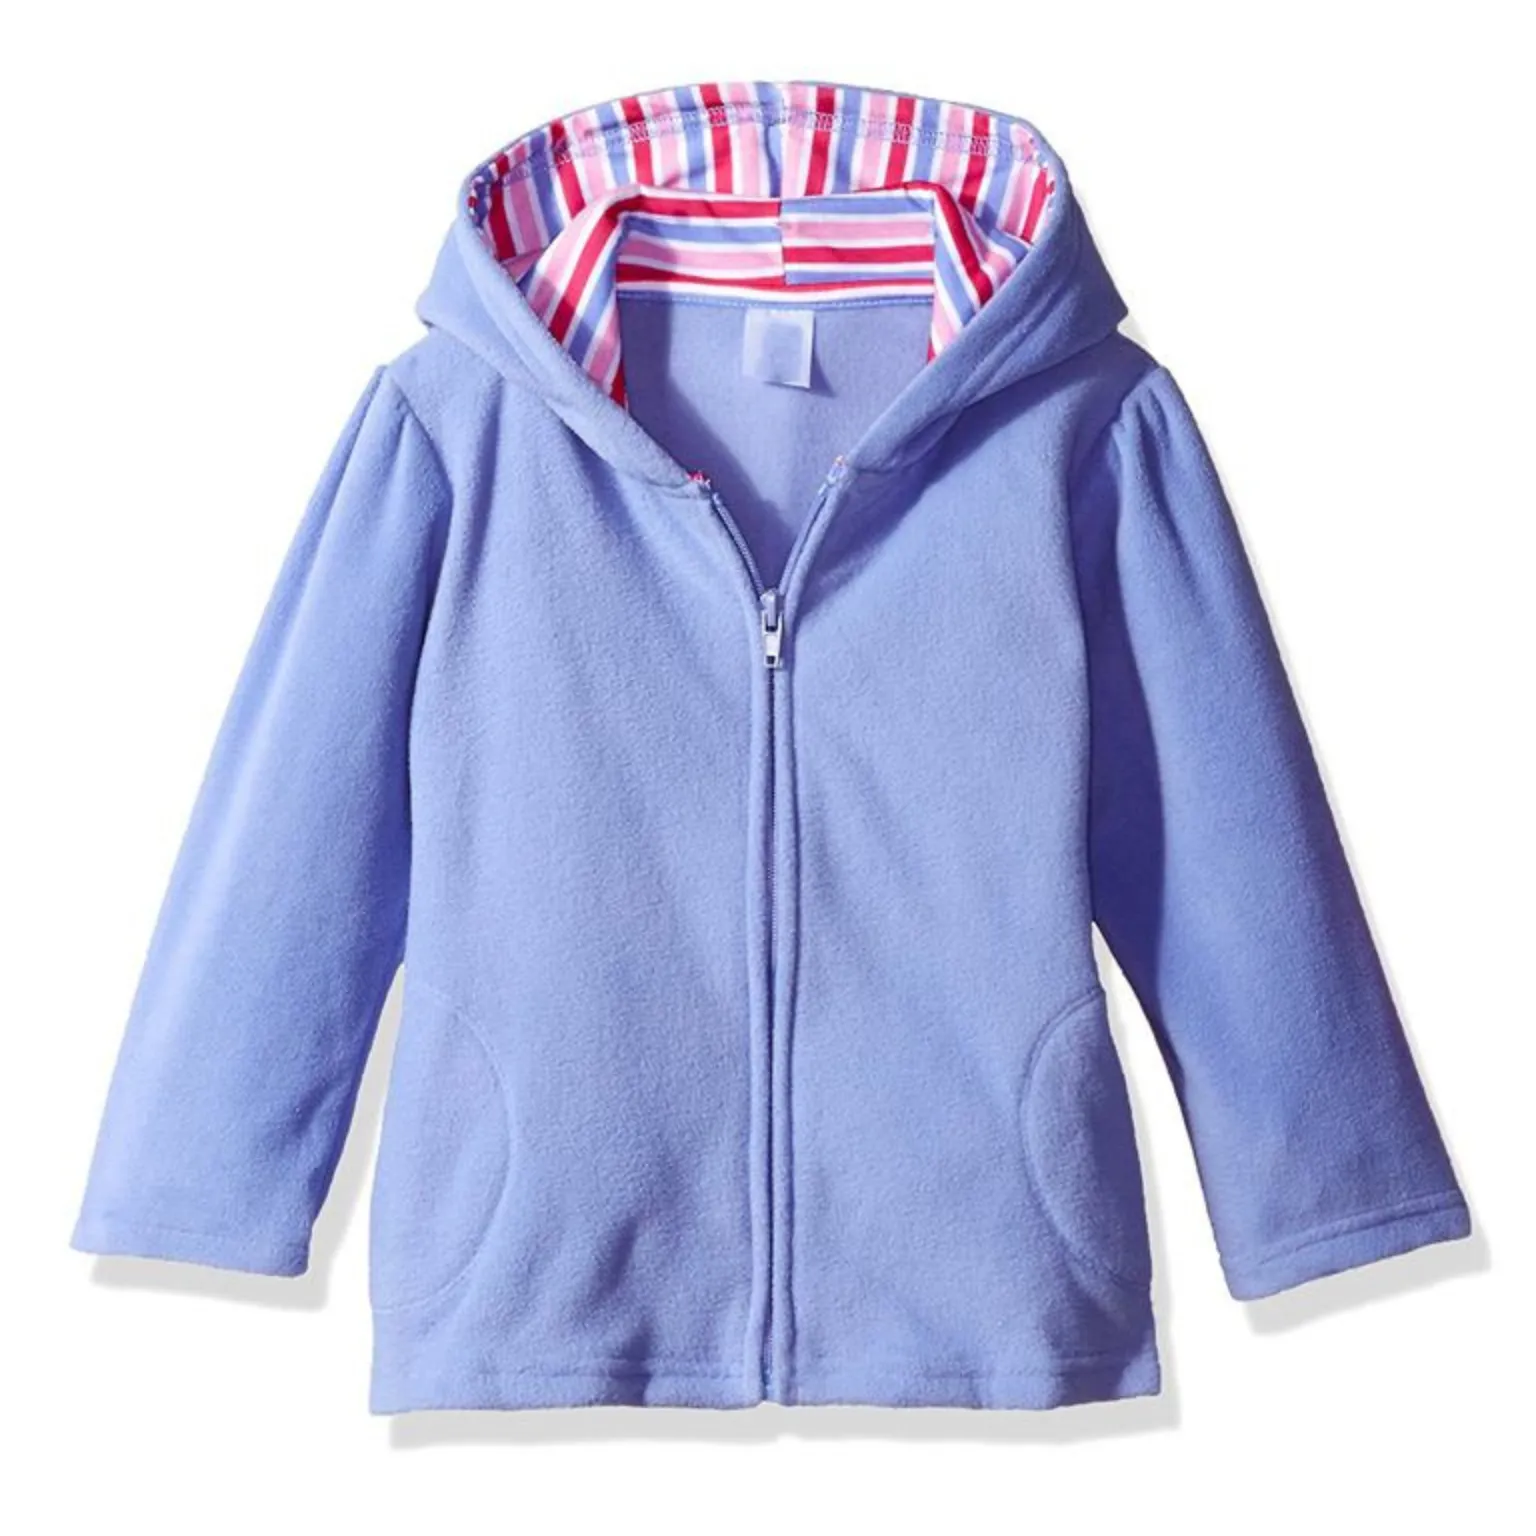 Eco-friendly OEM manufacturing service for Girl Hoodie.